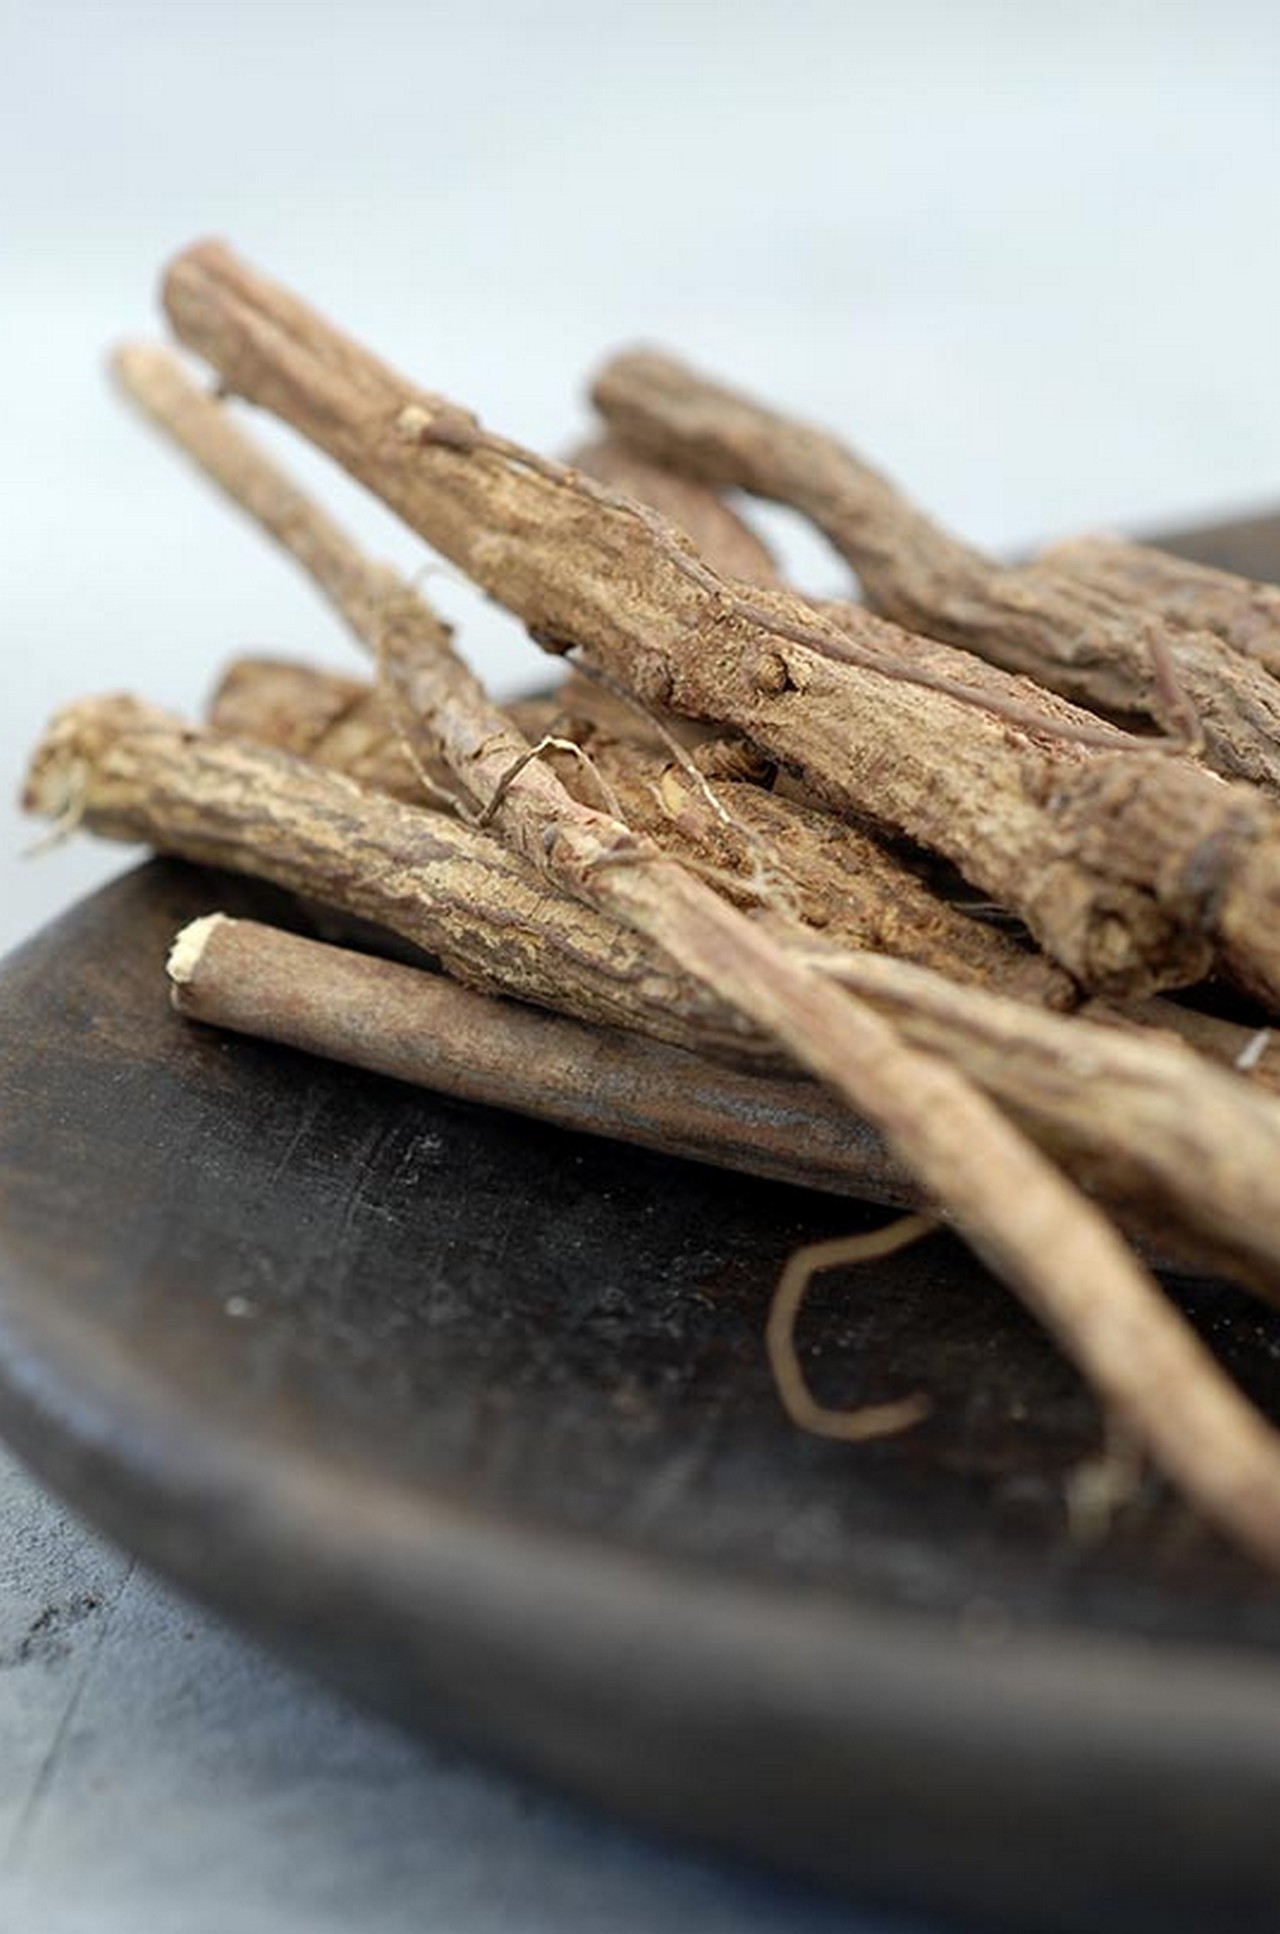  15 Health Benefits Of Licorice Root, Uses, And Side Effects